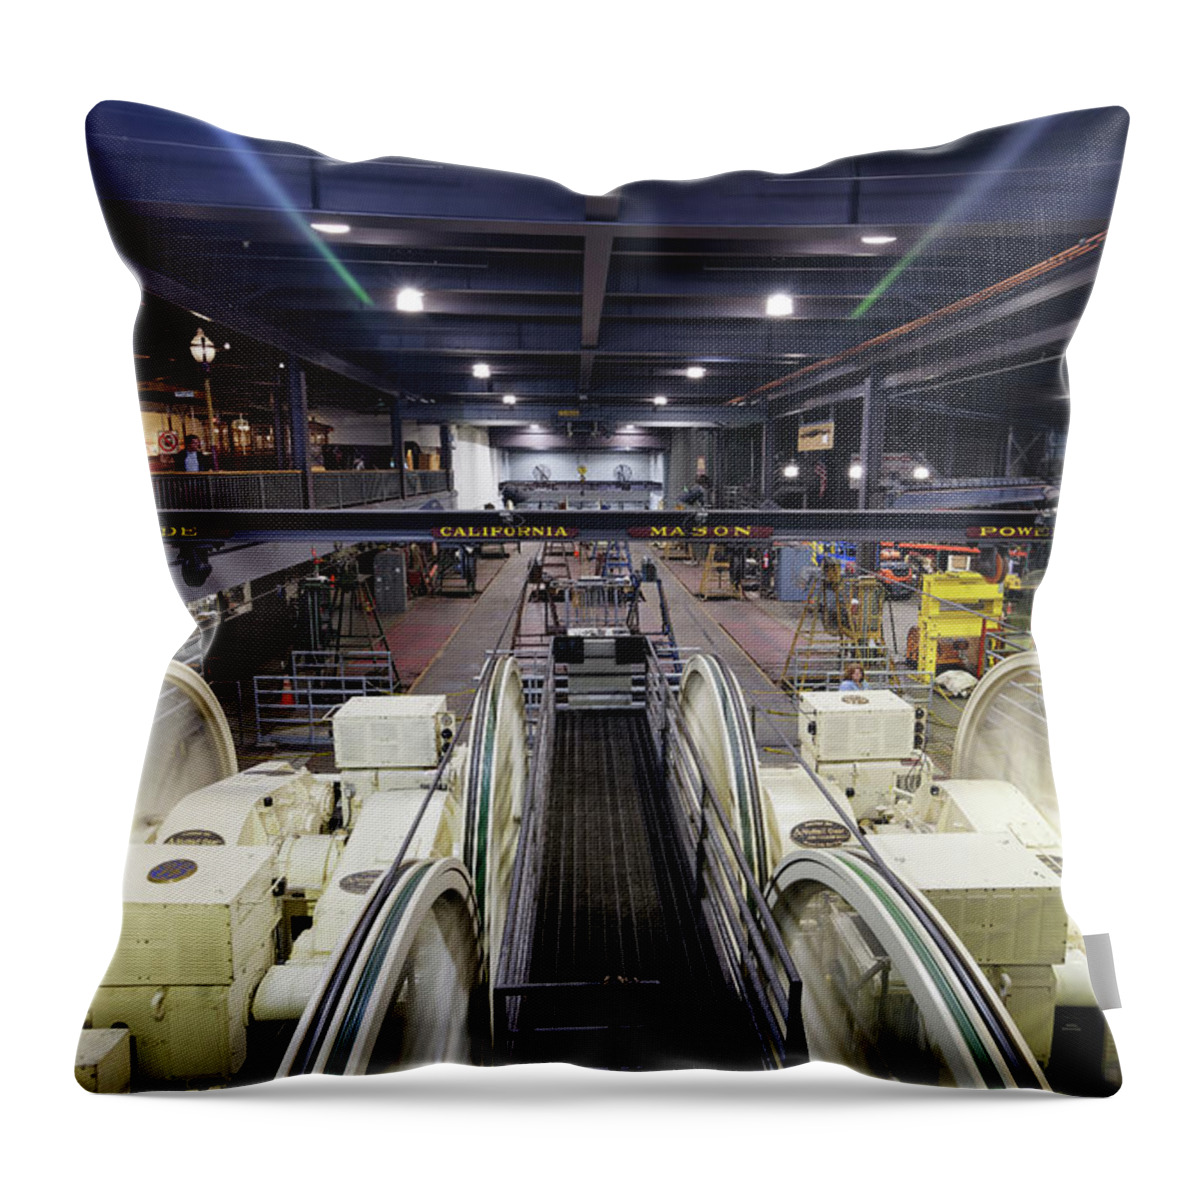 The Four Survivors Throw Pillow featuring the photograph The Four Survivors -- Cable Car Museum in San Francisco, California by Darin Volpe